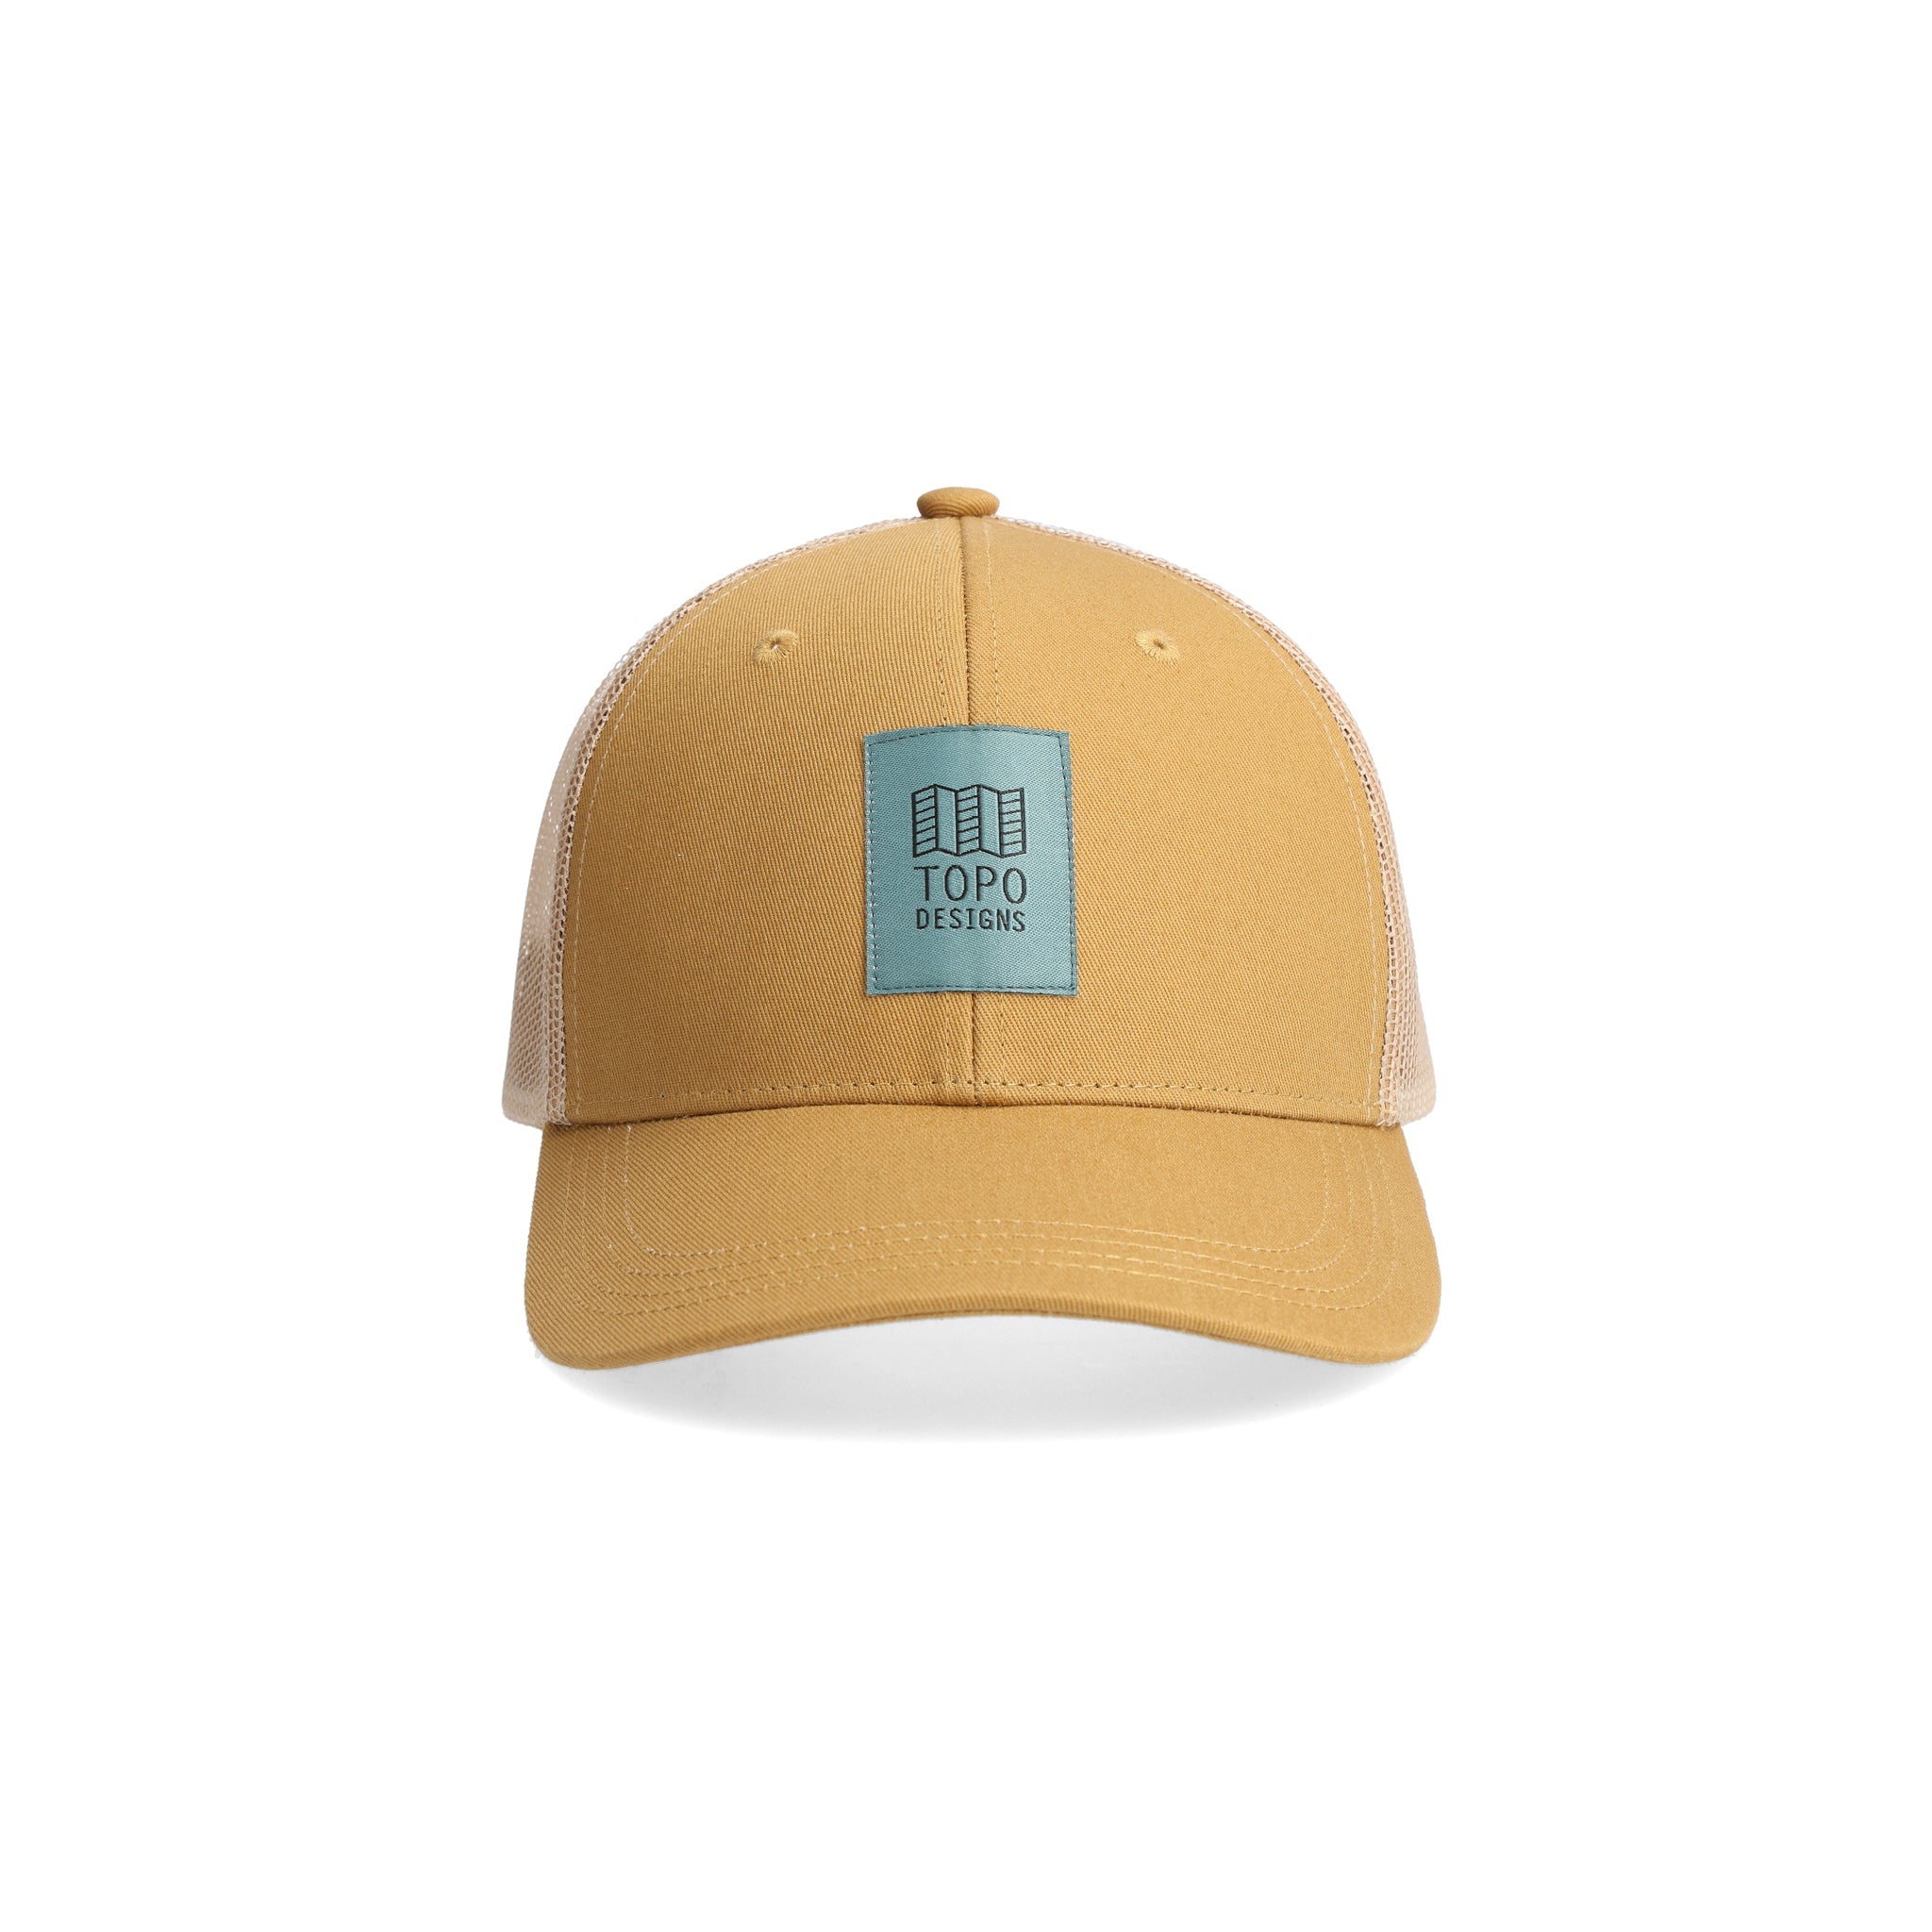 Topo Designs Trucker Hat with mesh back and original logo patch in "Khaki".